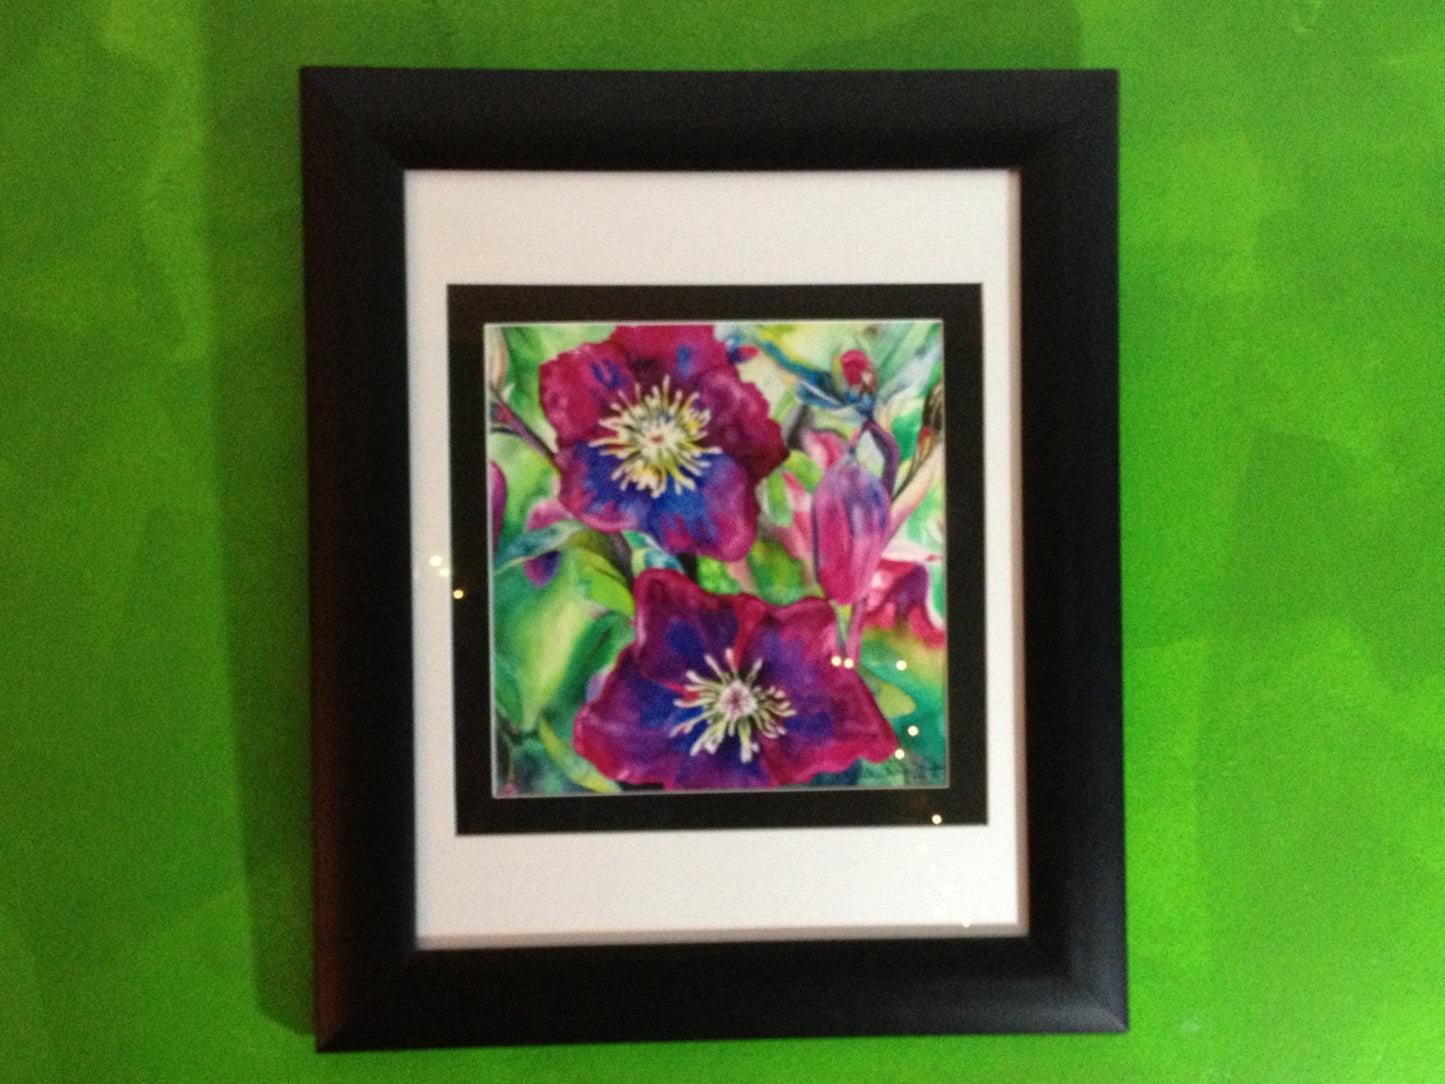 Framed Original Fine Art - PASSION - magenta pink flowers - 12" X 12"  Original Watercolor Painting Christie Marie E. Russell ©